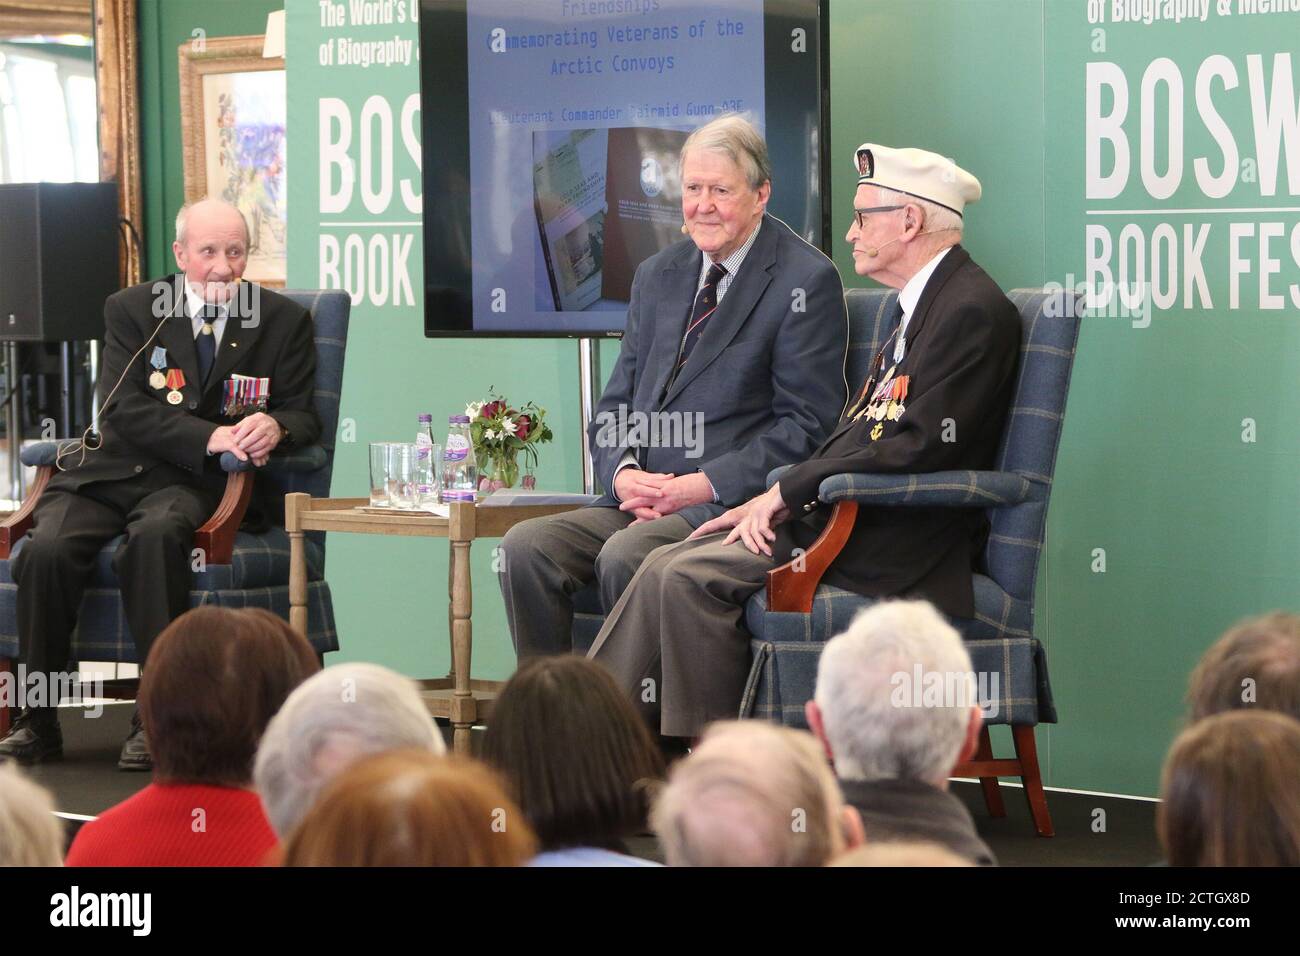 Boswell Book Festival, Dumfries House, Cumnock Ayrshire, Scotland, UK 12 May 2018.  Two veterans of the  Arctic convoys ,David Craig and John Patterson discuss their memories of the dangerous time they faced during World War two.  The festival  is unique in that it is the only Book Festival which exculsively deals with memoirs & biographies. Stock Photo